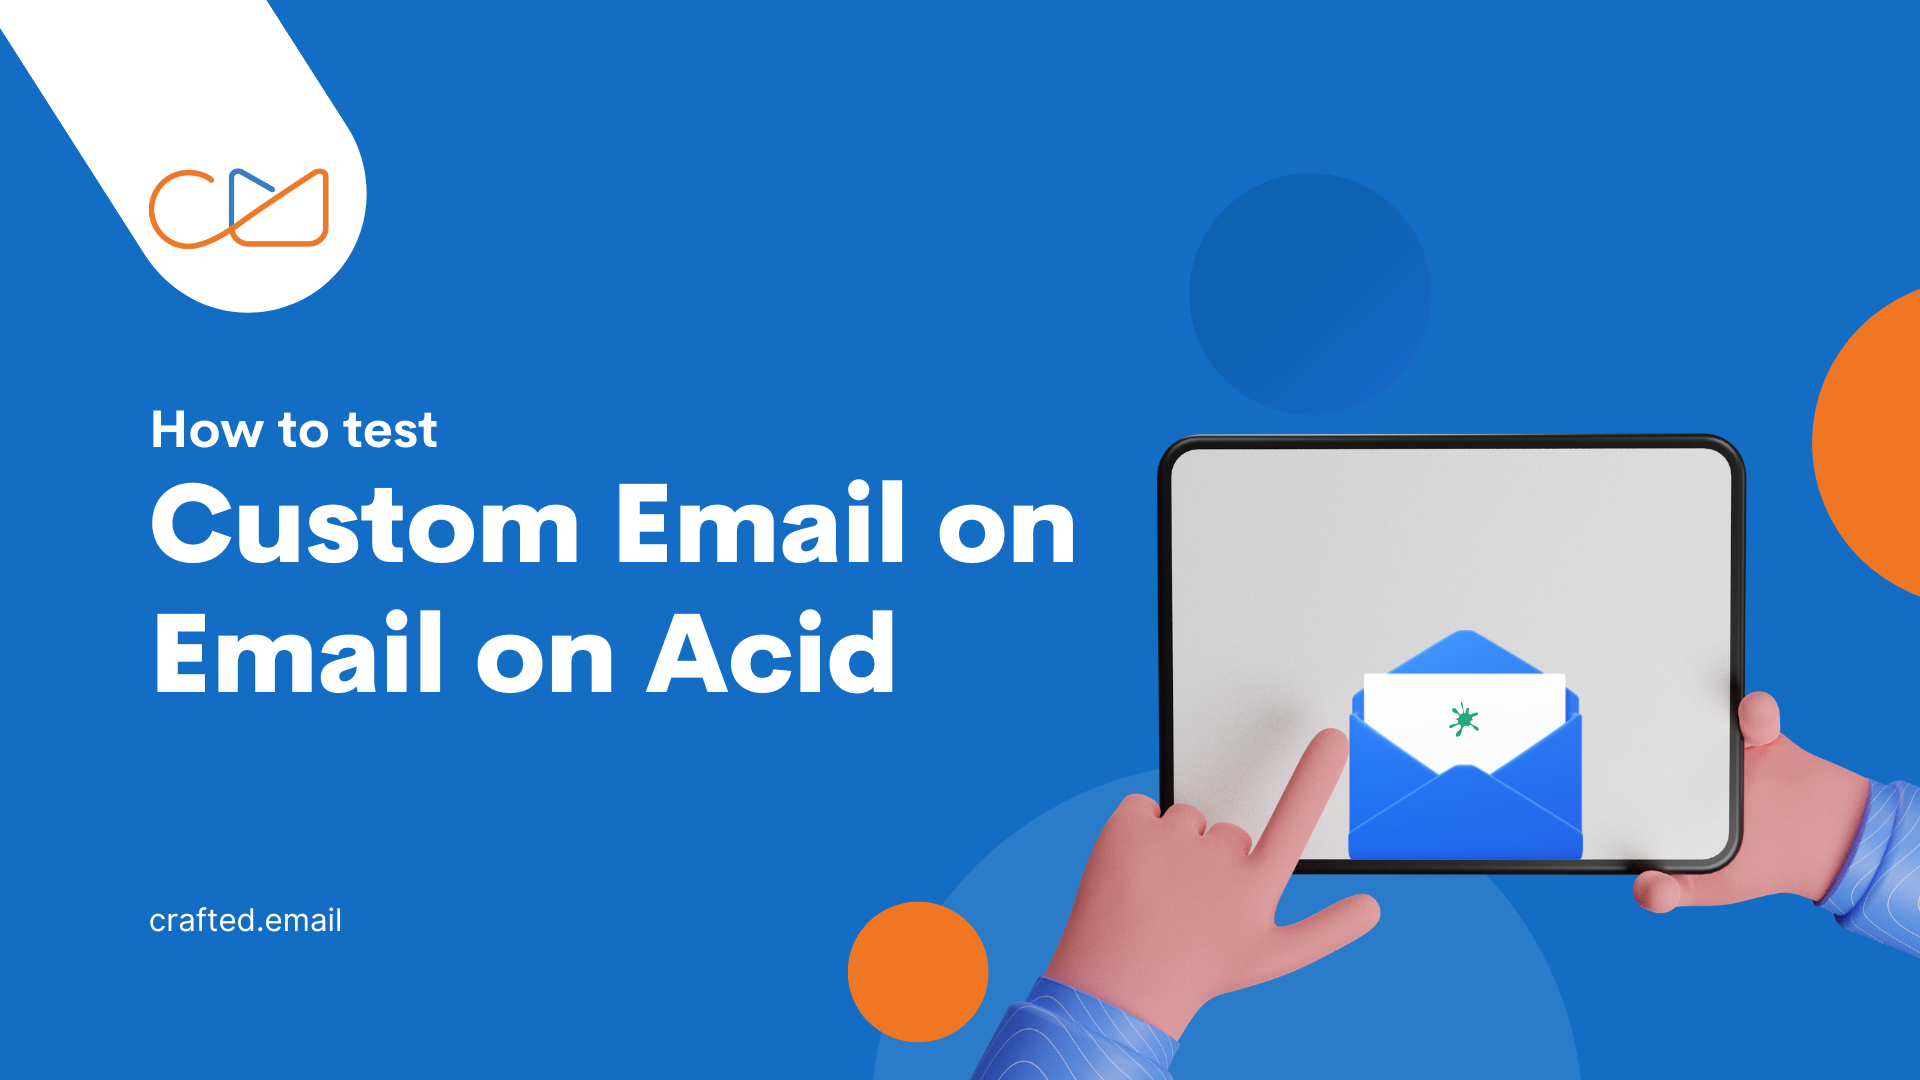 How to Test Custom Email on Email on Acid